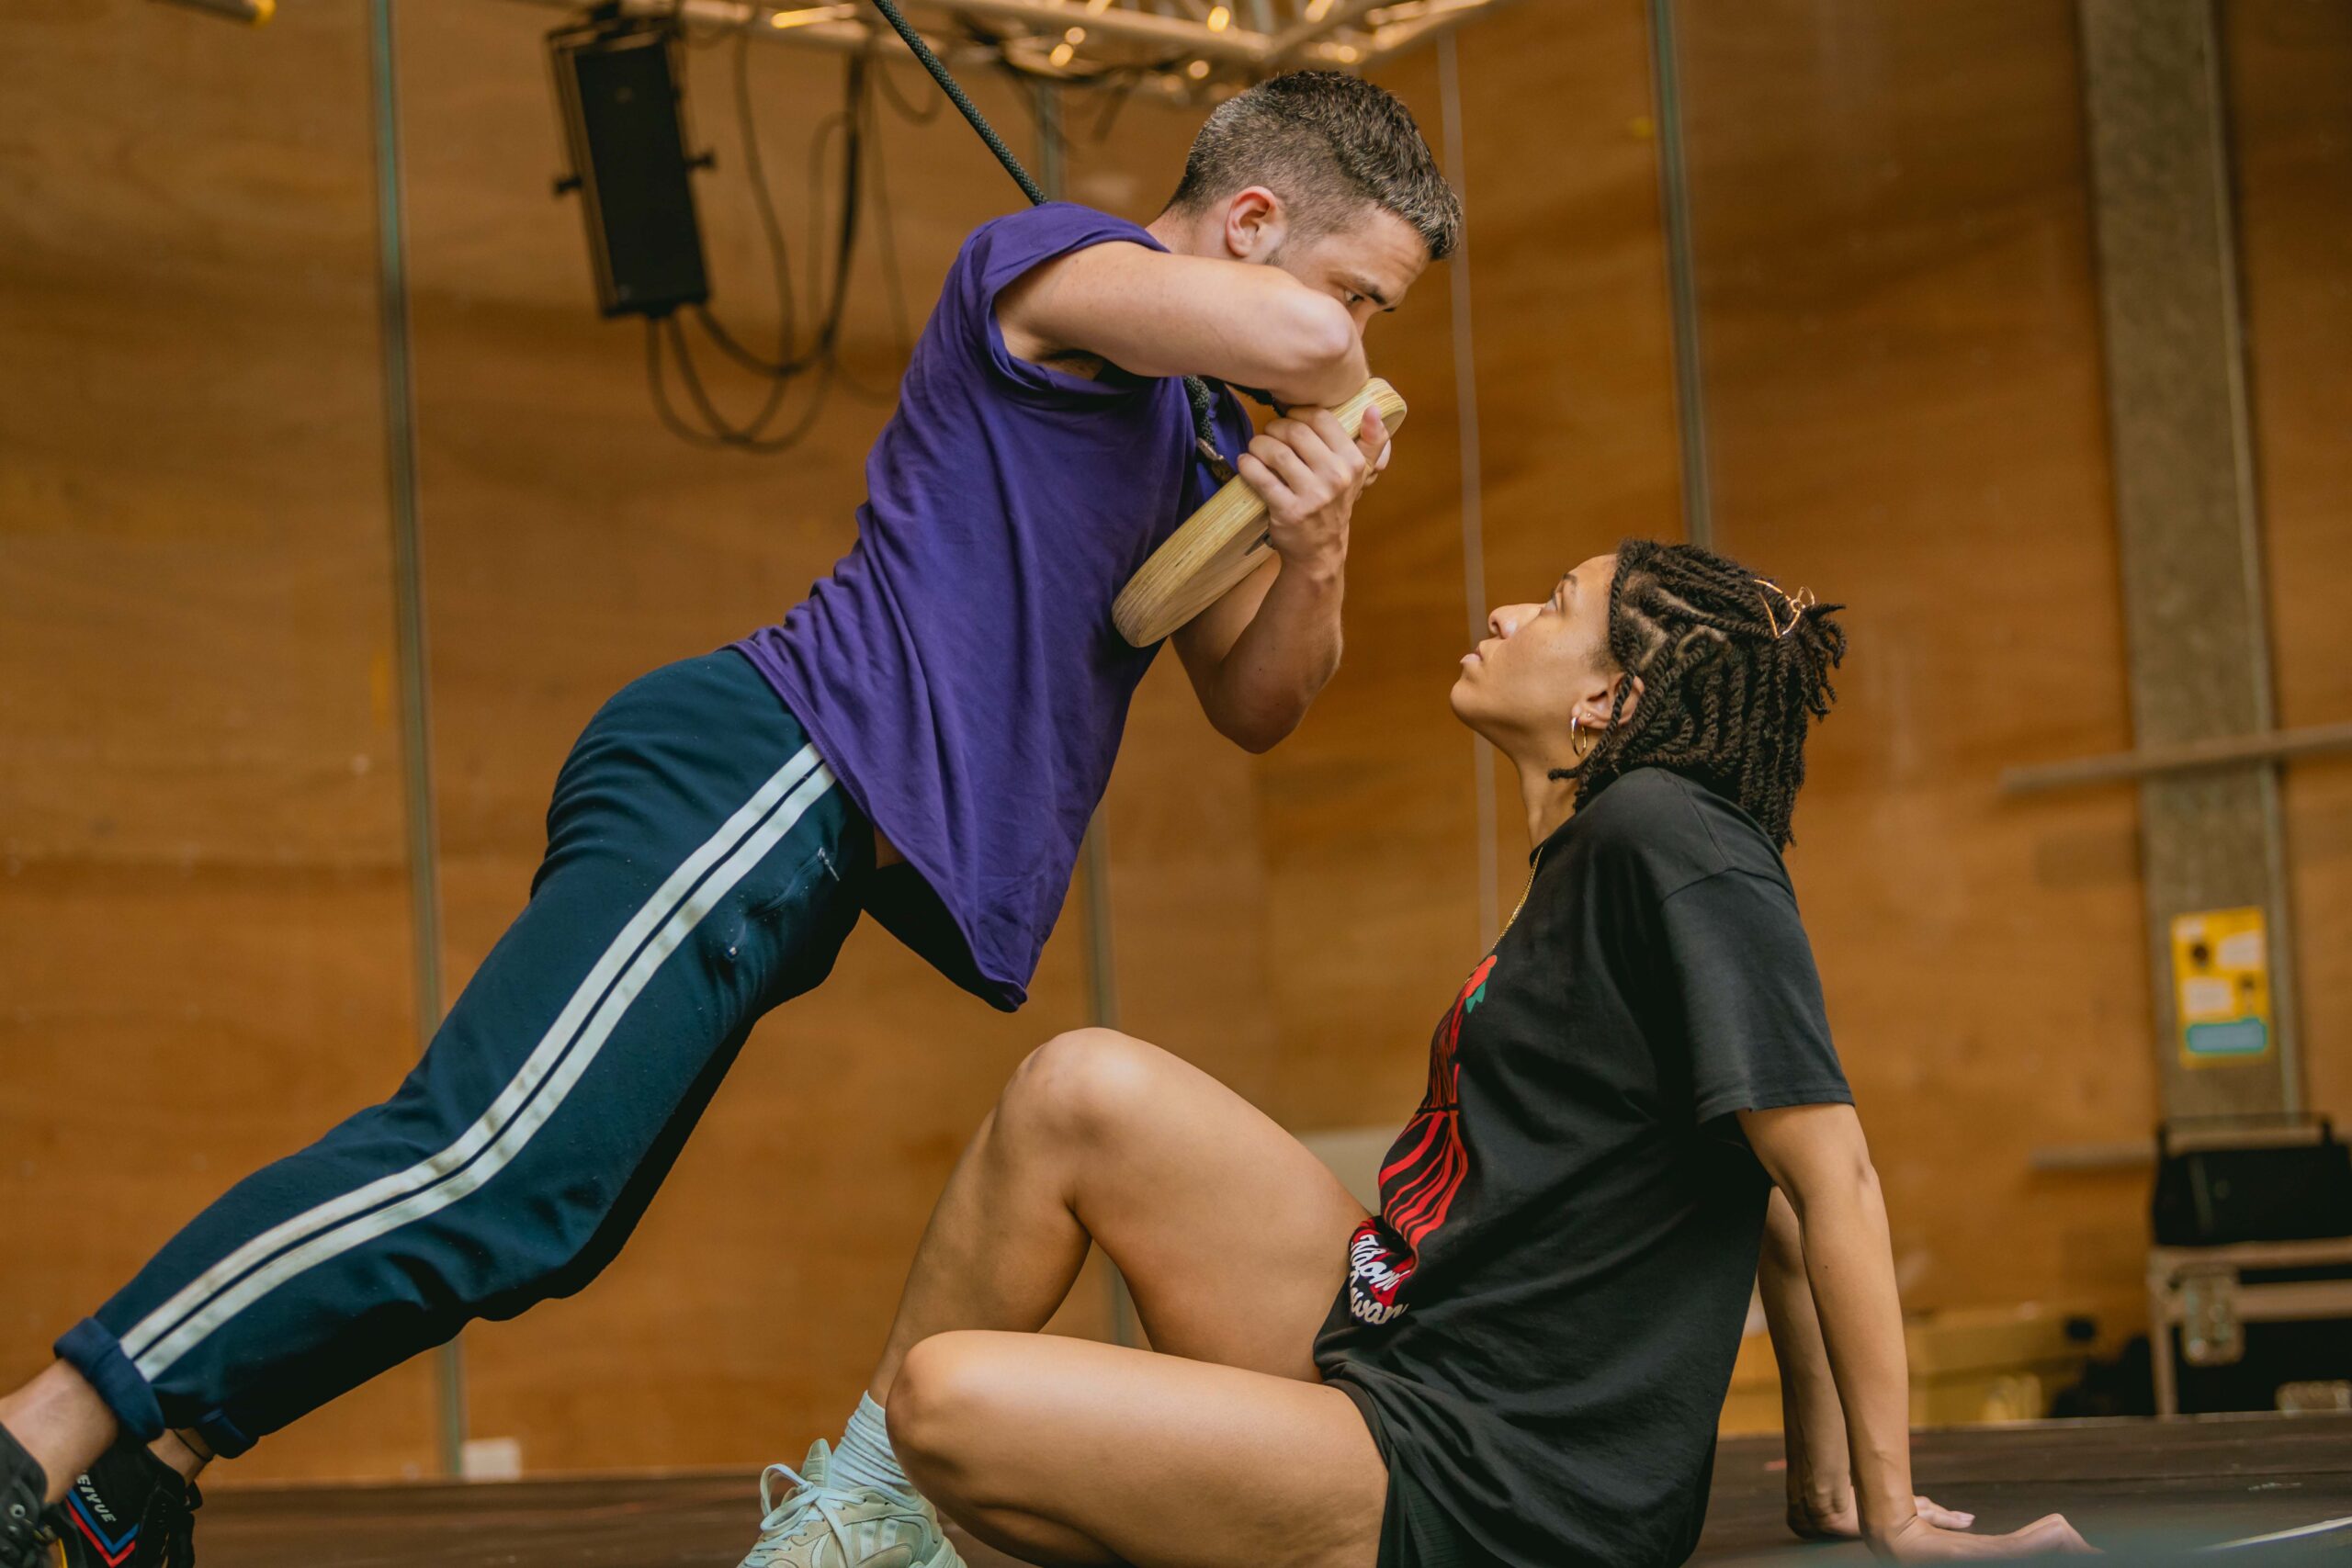 In a wood-cladded rehearsal space, Felipe Pacheco (Gregor) leans over Hannah Sinclair Robinson (Grete), supported by a swing. Hannah looks up at him from her seated position on the floor, her arms behind her for support. Both are wearing casual leisurewear.